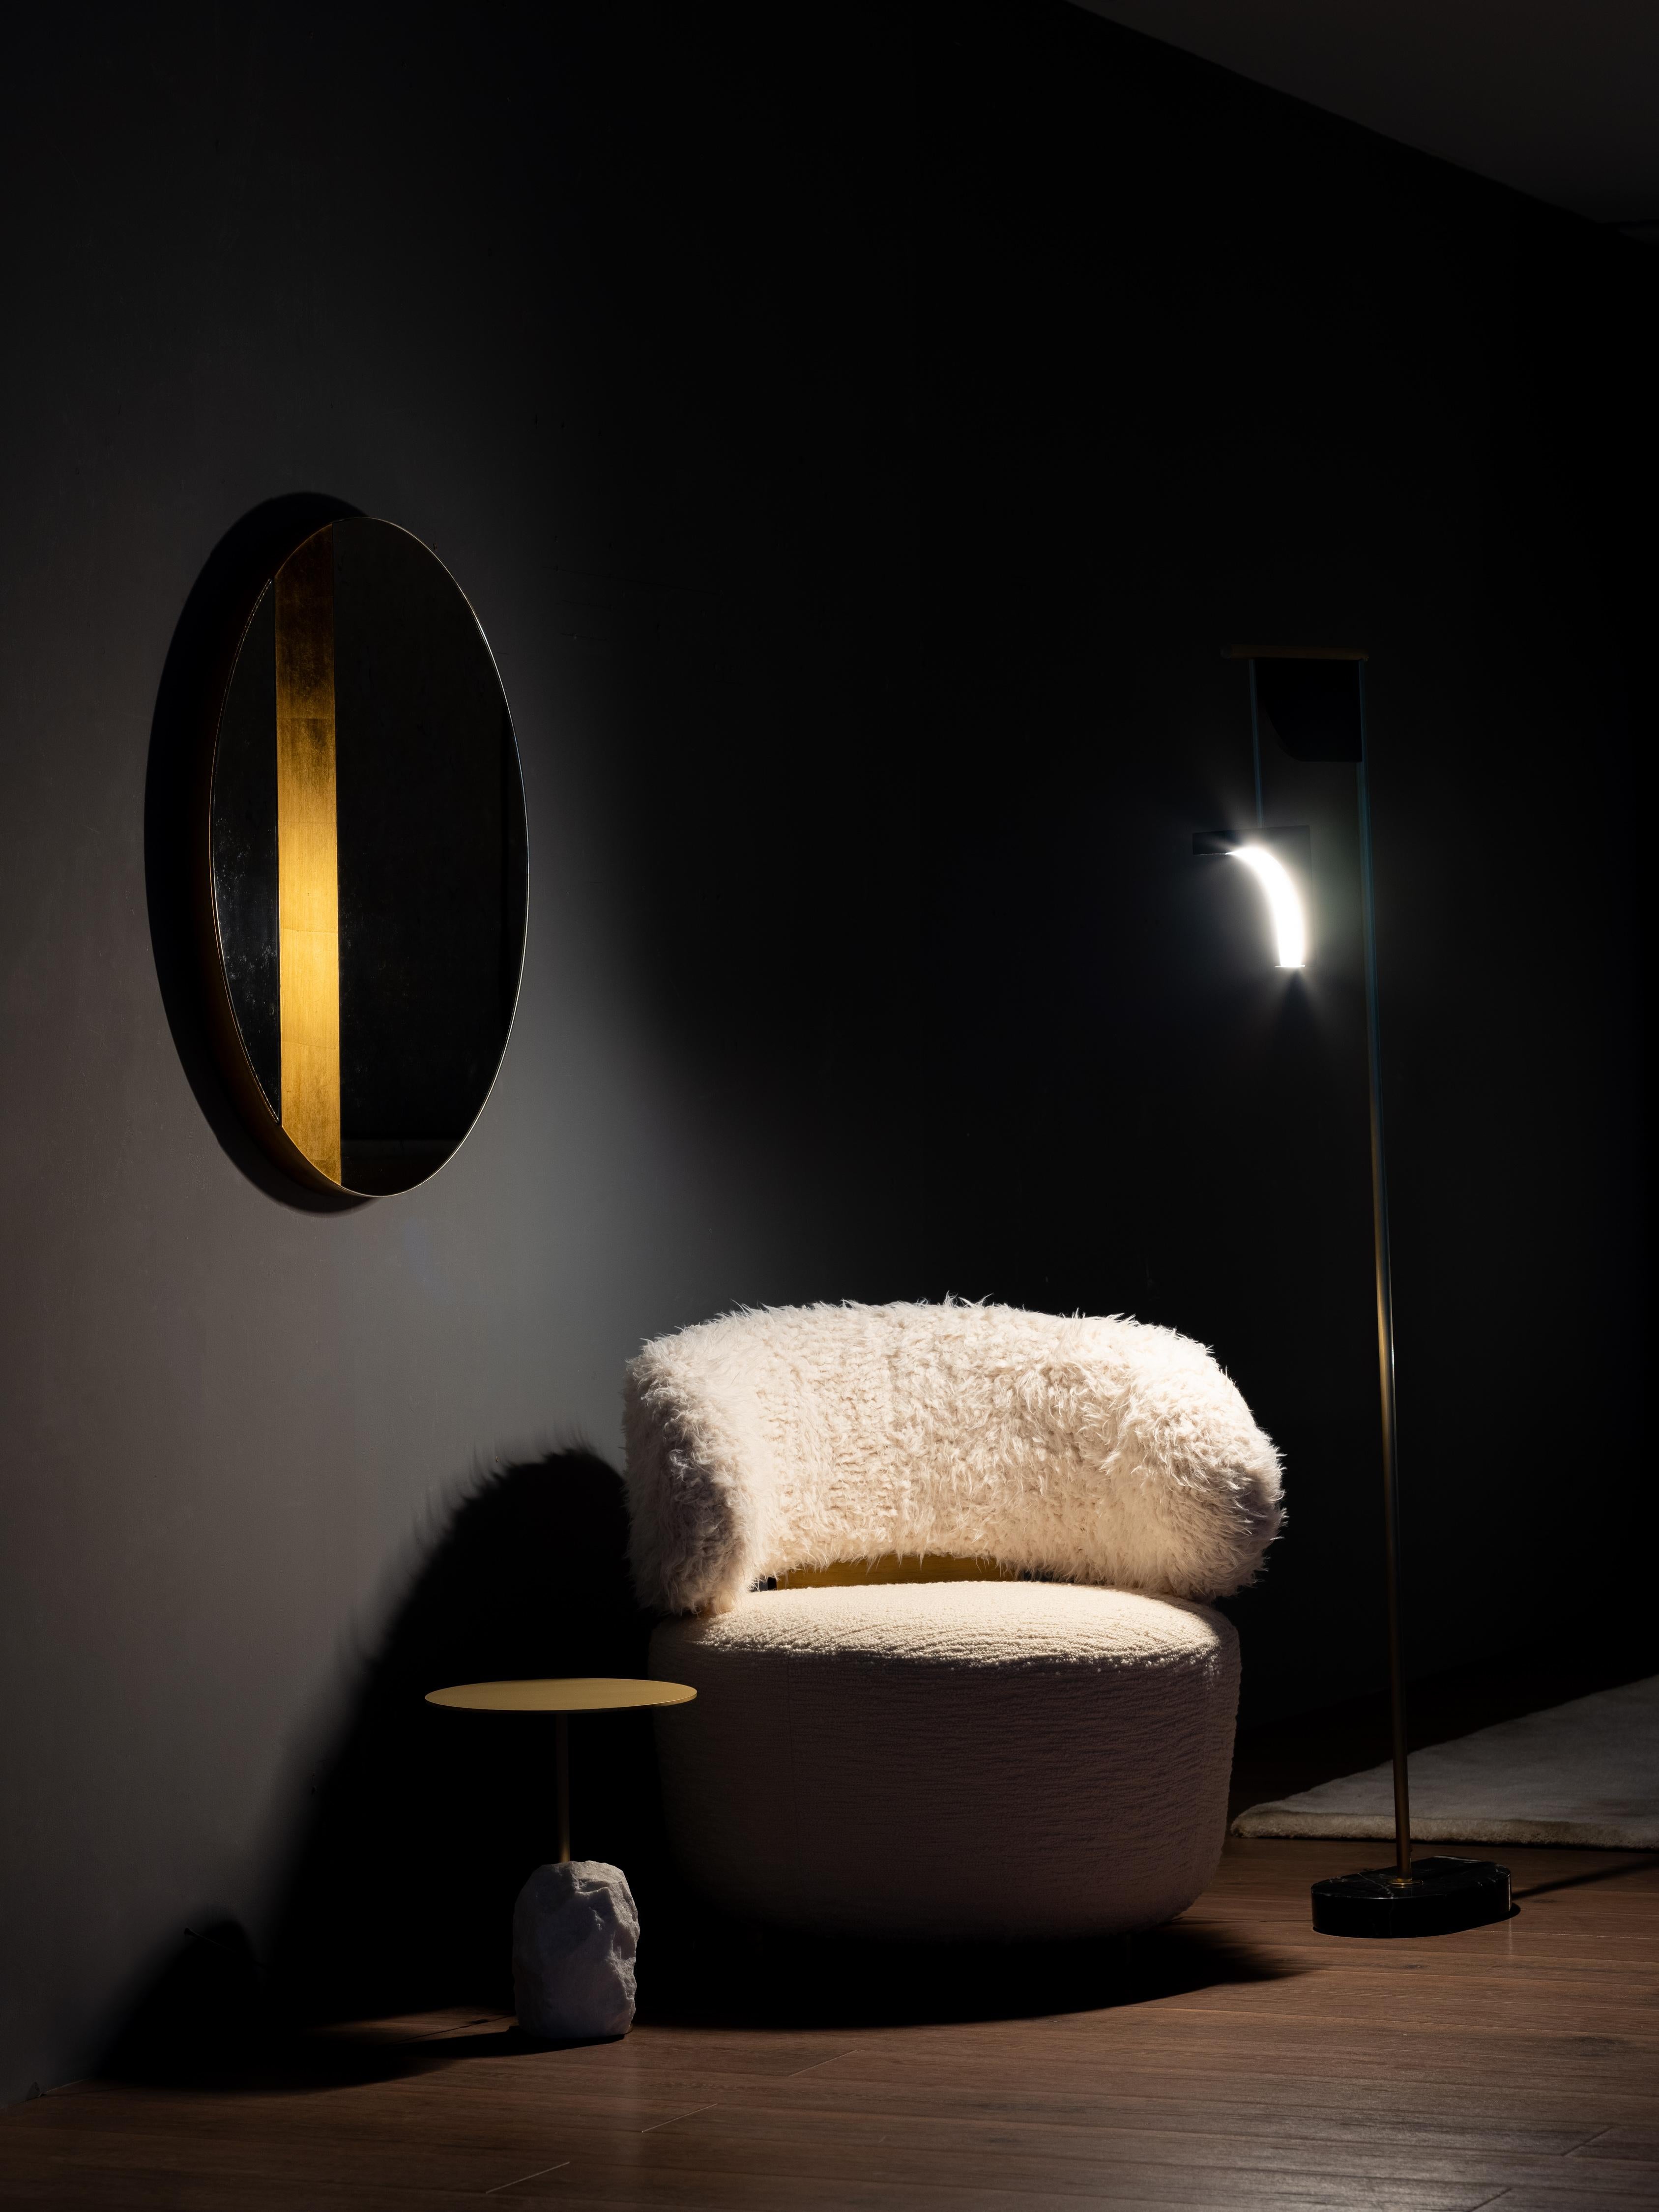 Avignon Wall Mirror, Modern Collection, Handcrafted in Portugal - Europe by GF Modern.

A stunning modern mirror with exuberant detail. The round, aged mirror with hand applied gold leaf stands out in any room.

Avignon Wall Mirror Material